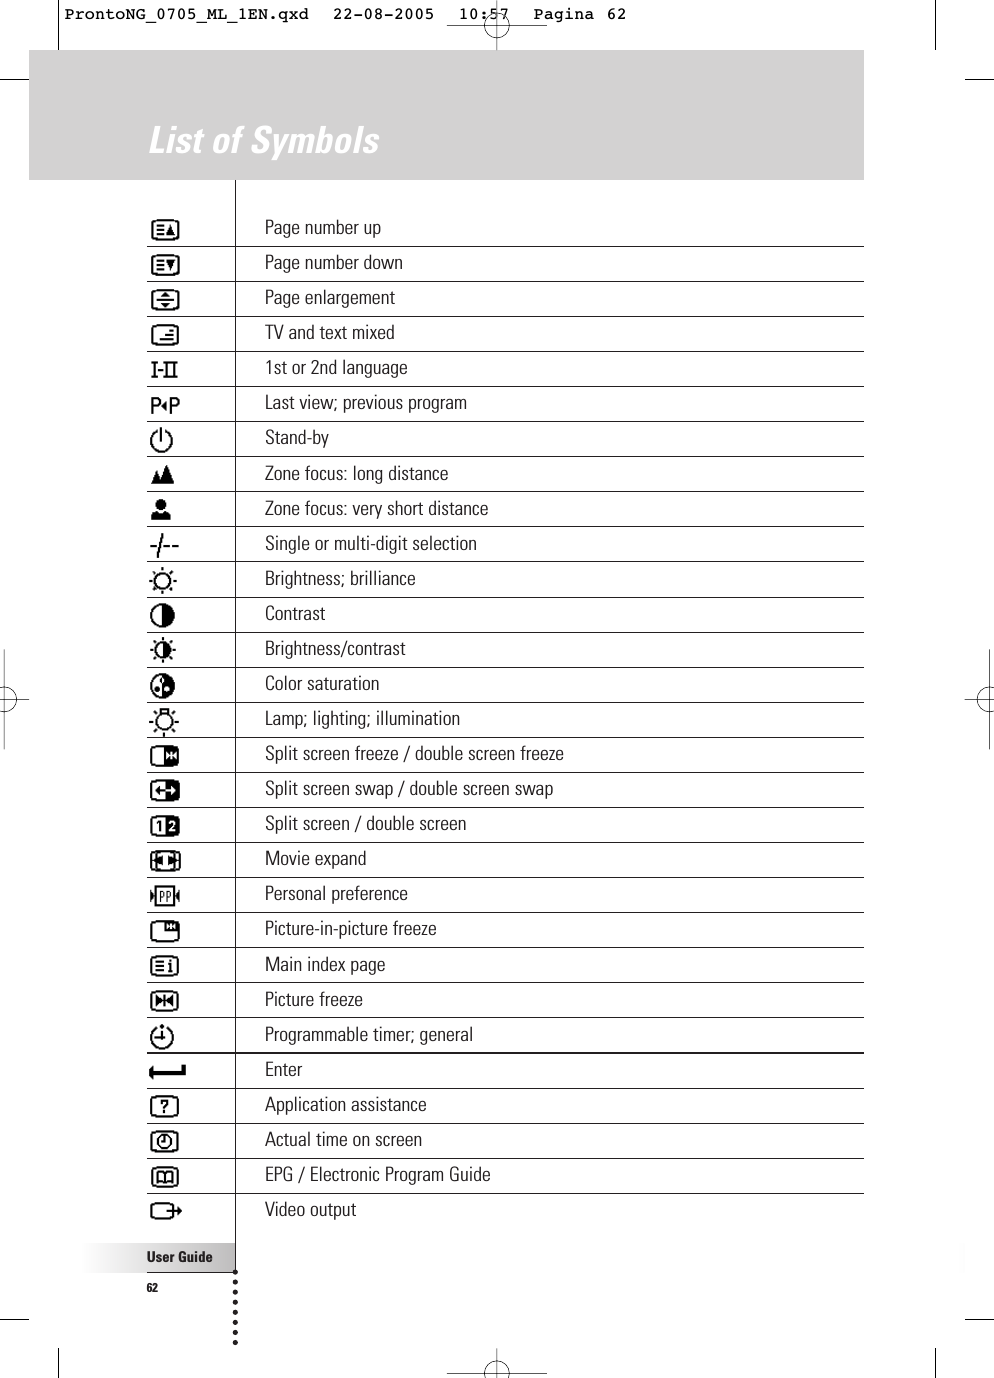 User Guide62List of Symbols Page number upPage number downPage enlargementTV and text mixed1st or 2nd languageLast view; previous programStand-byZone focus: long distanceZone focus: very short distanceSingle or multi-digit selectionBrightness; brillianceContrastBrightness/contrastColor saturationLamp; lighting; illuminationSplit screen freeze / double screen freezeSplit screen swap / double screen swapSplit screen / double screenMovie expandPersonal preferencePicture-in-picture freezeMain index pagePicture freezeProgrammable timer; generalEnterApplication assistanceActual time on screenEPG / Electronic Program GuideVideo outputProntoNG_0705_ML_1EN.qxd  22-08-2005  10:57  Pagina 62